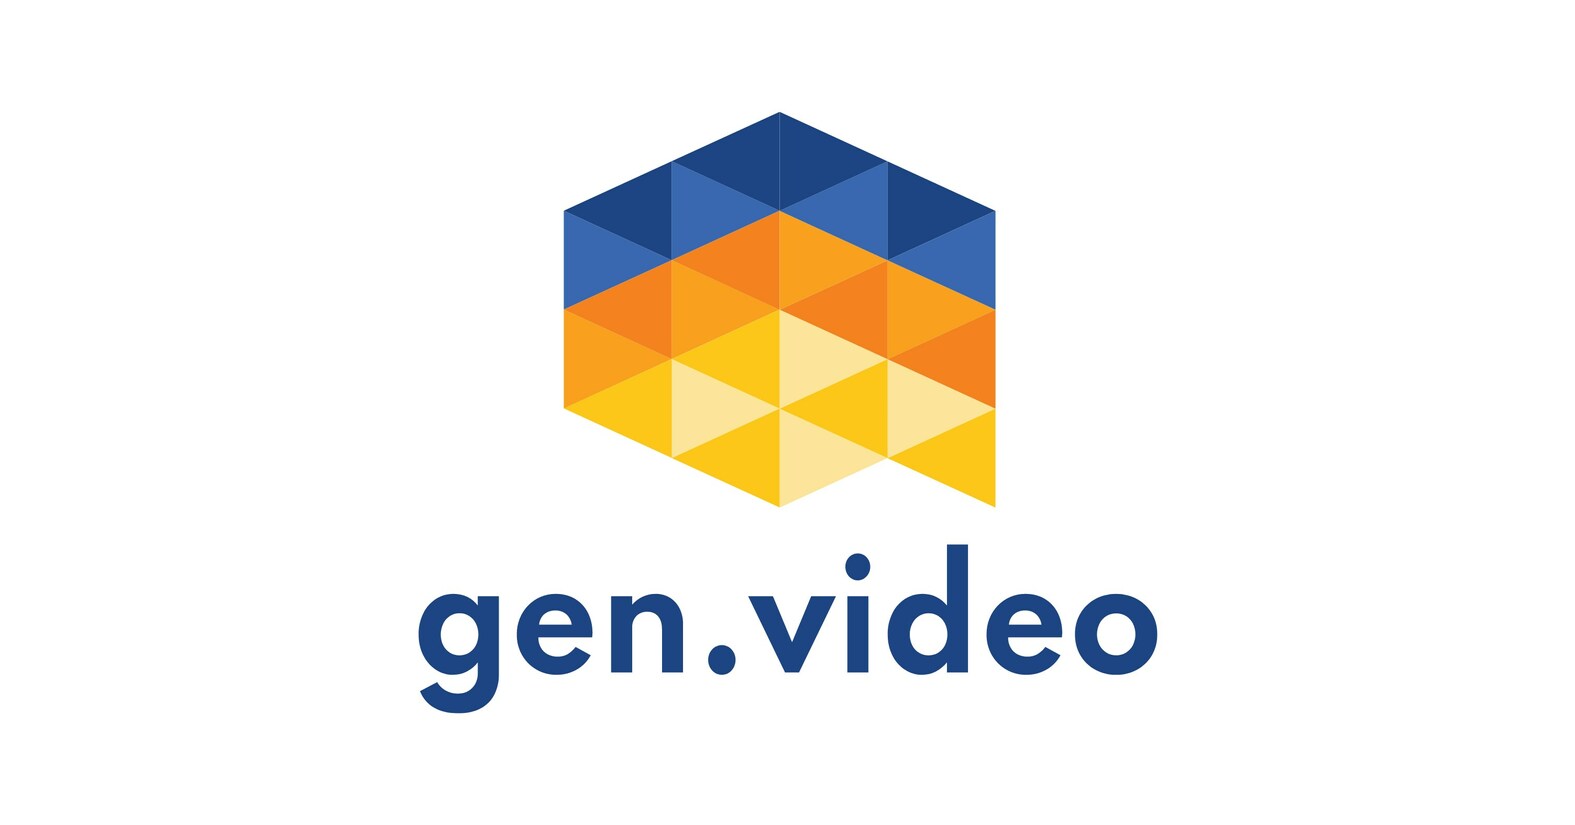 Jessica Thorpe is Elevated to CEO of gen.video After Two Years of Double-Digit N..